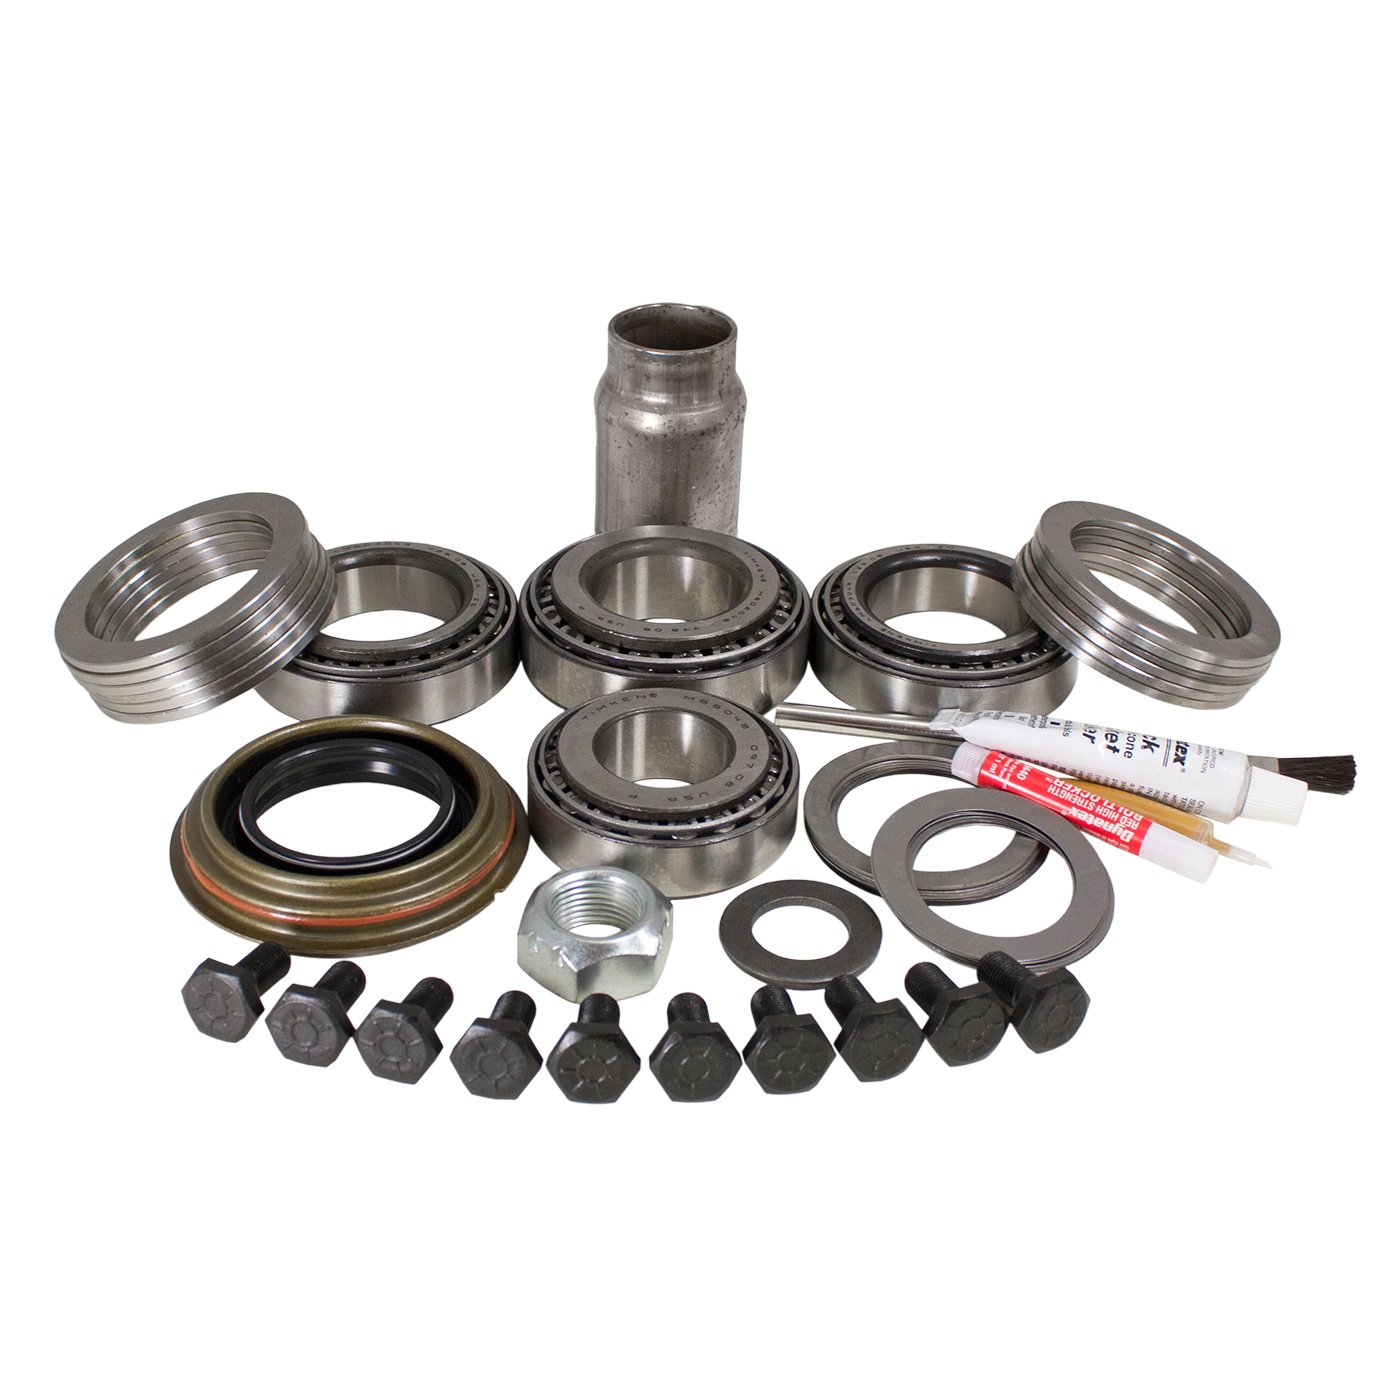 USA Standard ZK D44HD Master Overhaul Kit, For The Dana 44-Hd Diff, For '02-Down Grand Cher